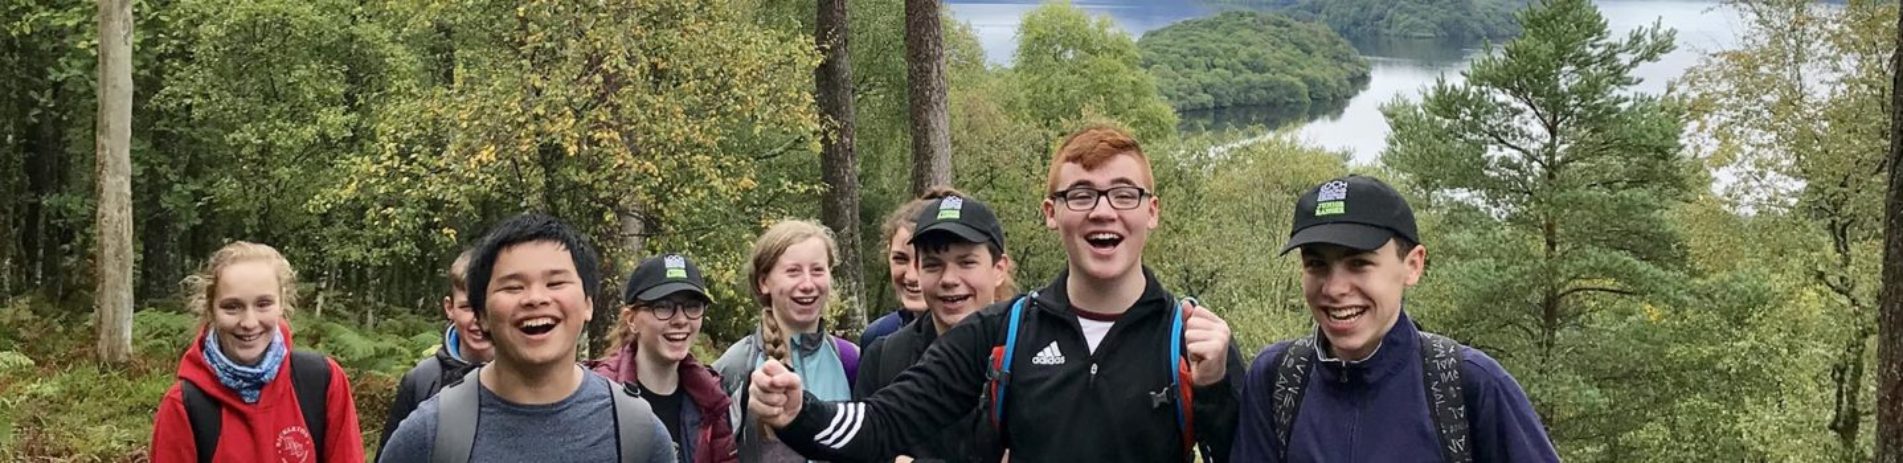 group-of-junior-rangers-students-laughing-at-the-edge-of-forest-on-inchcailloch-island-on-loch-lomond